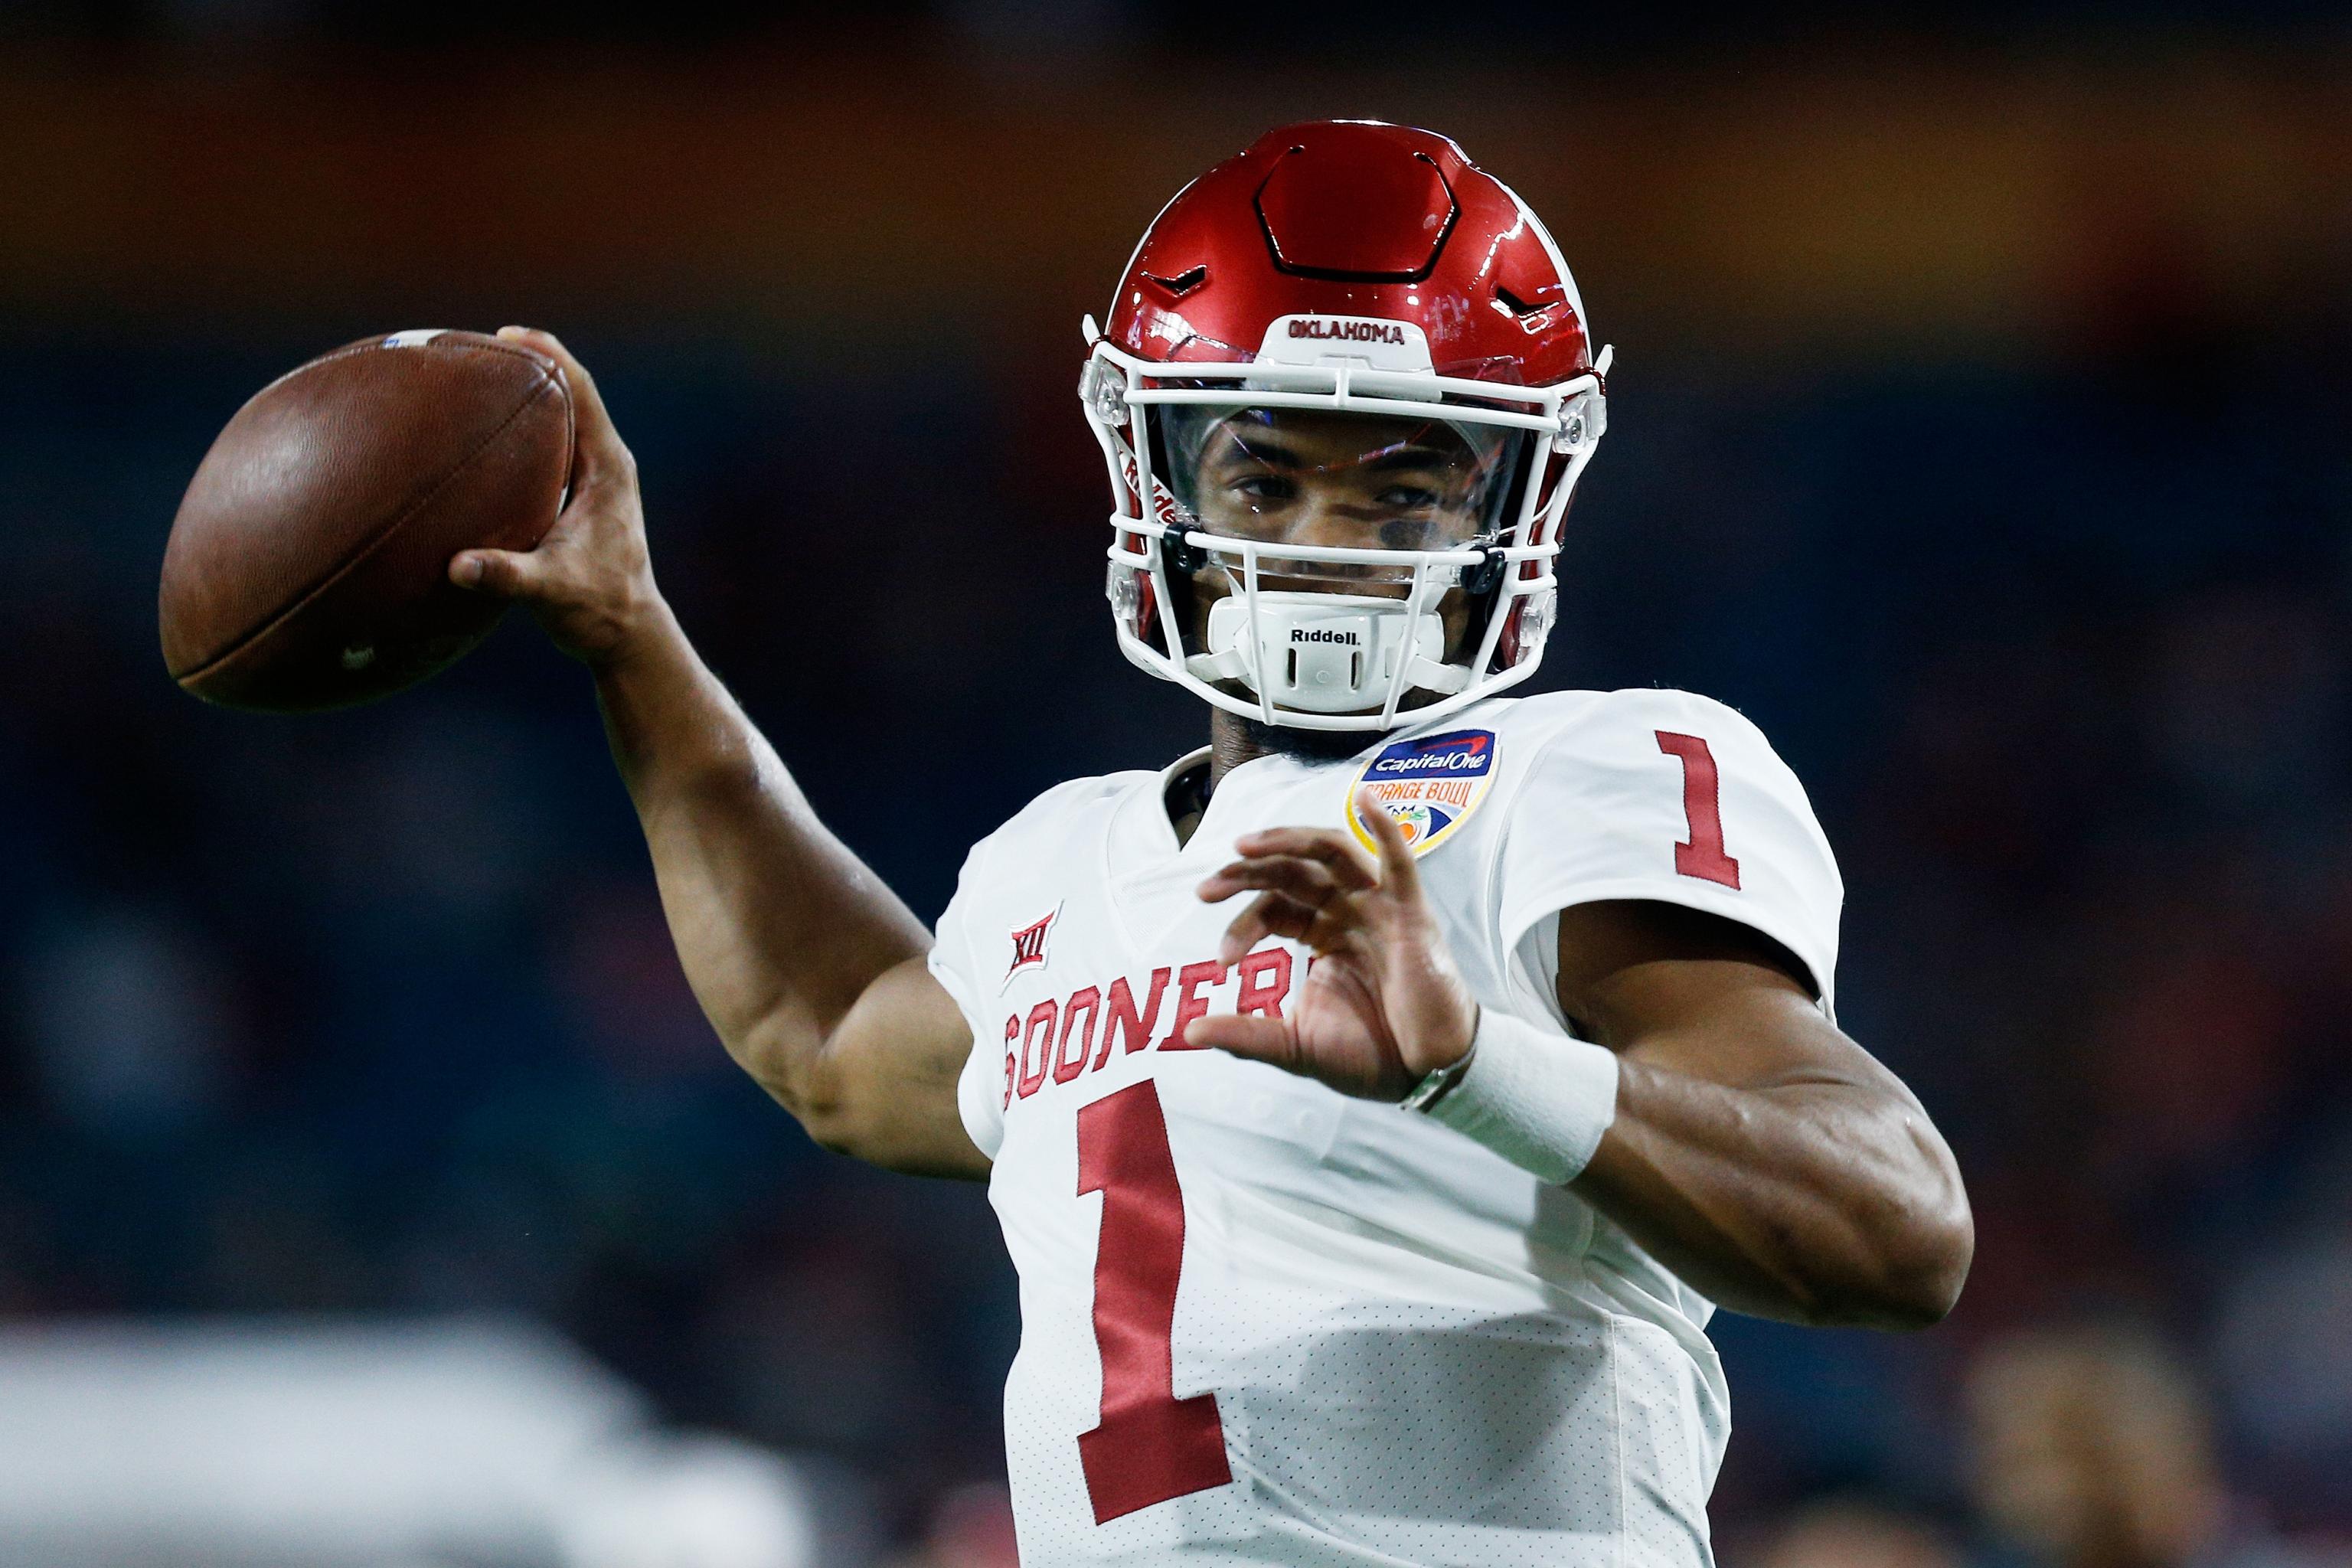 The A's are the big losers in Kyler Murray's NFL Draft saga